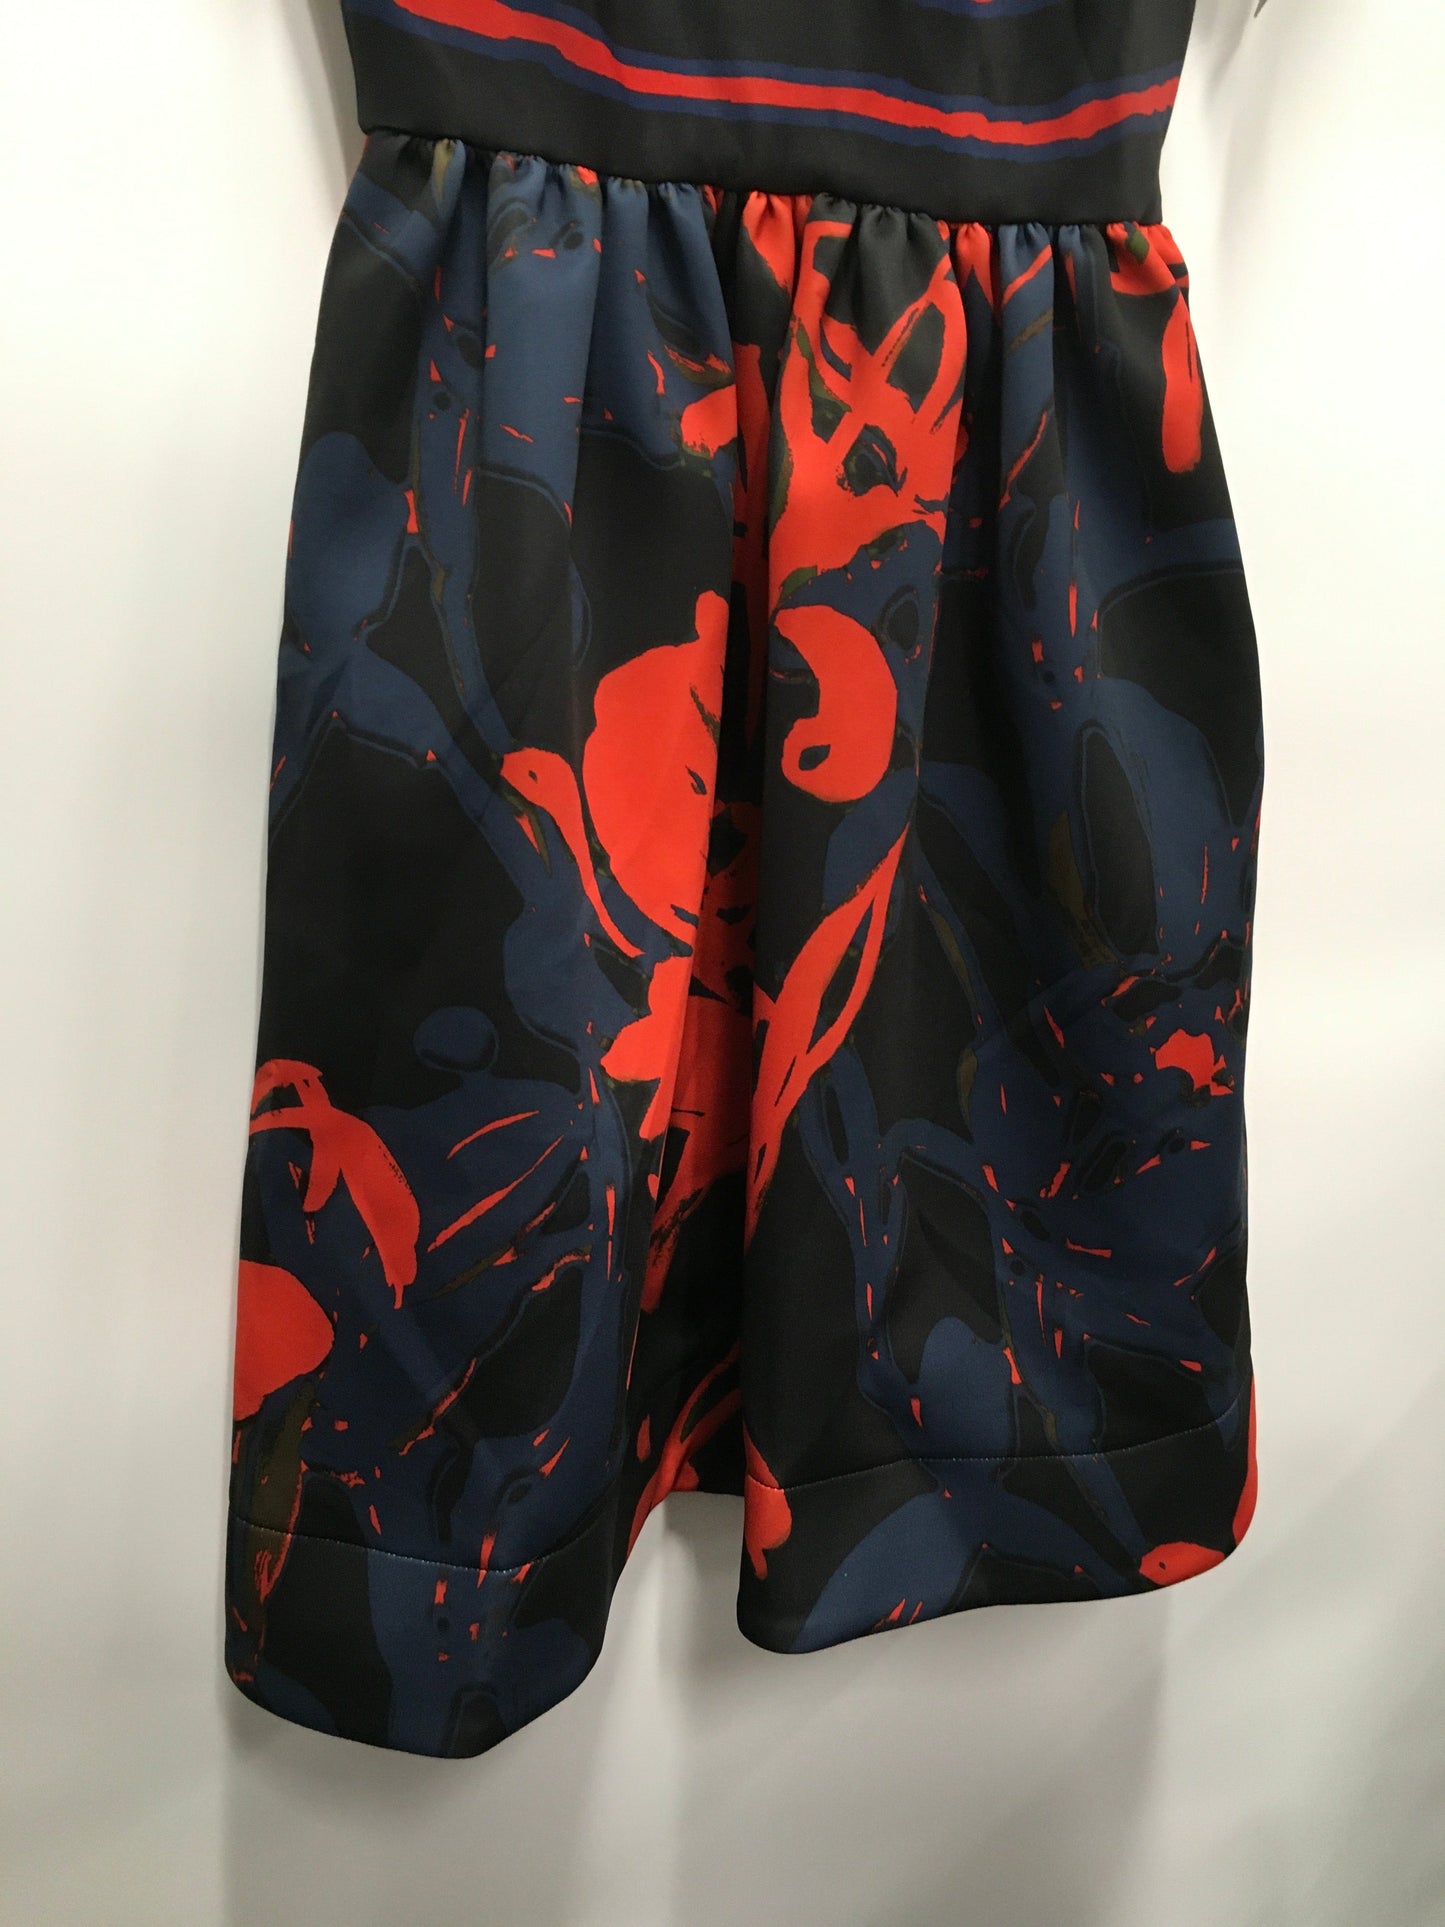 Black & Red Dress Party Short Taylor, Size S